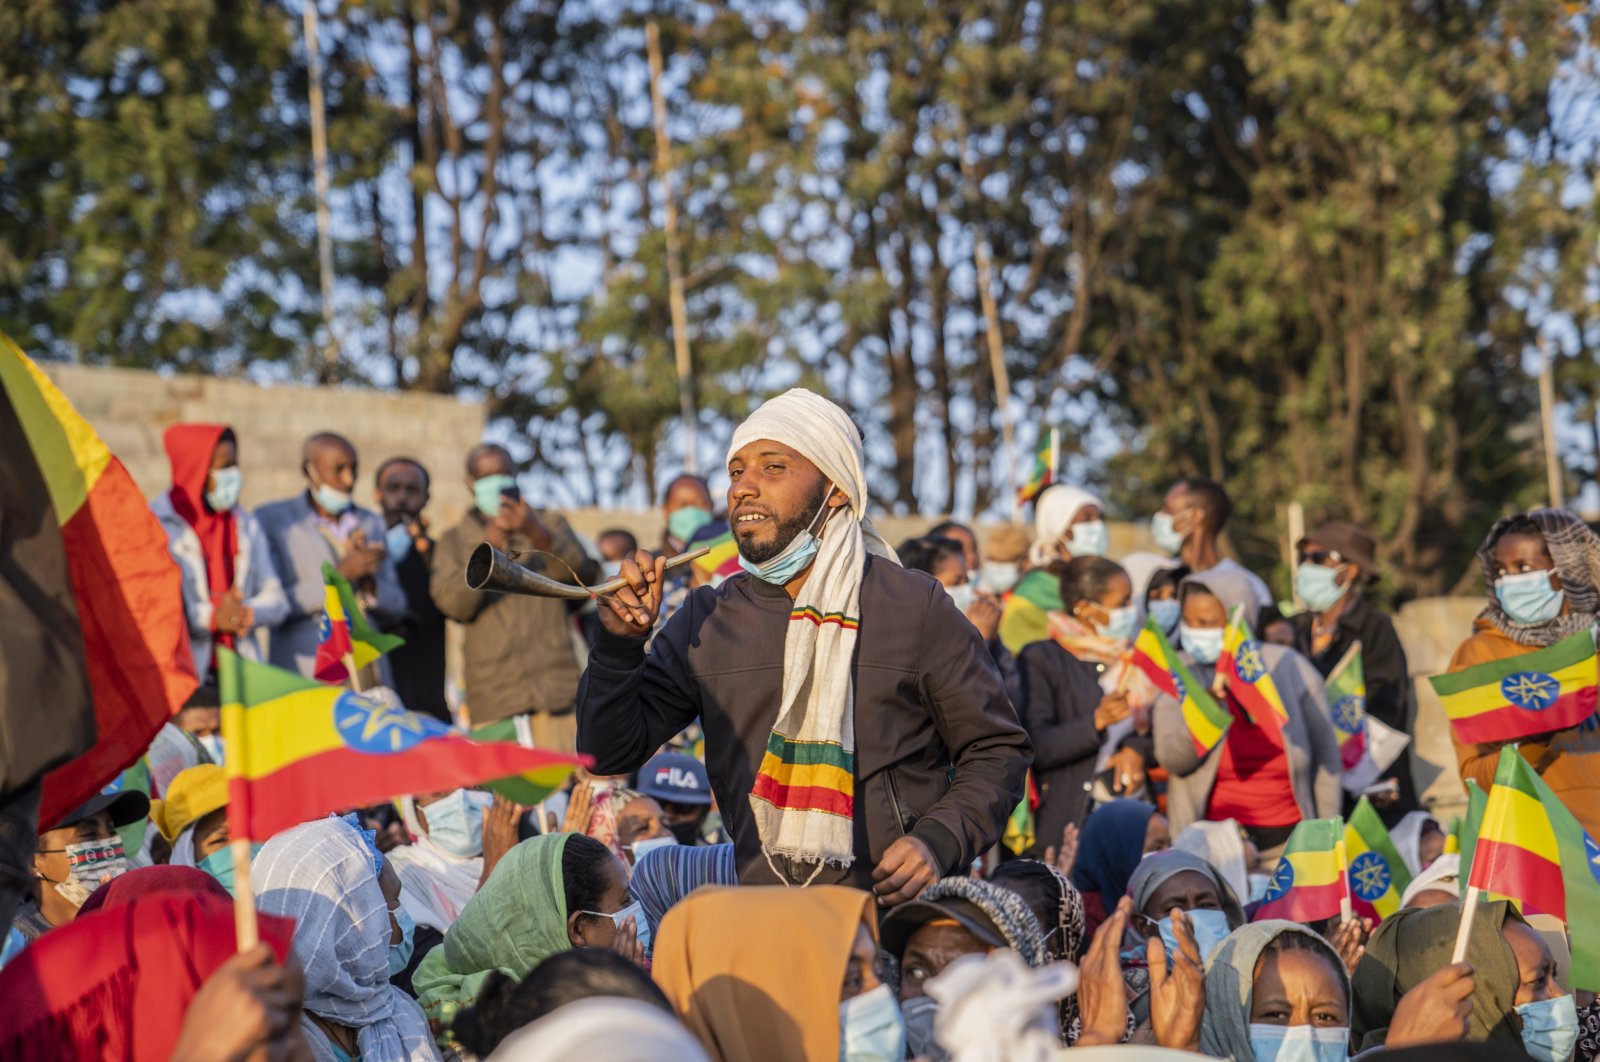 Ethiopians attend a rally held to show support for the government and the Ethiopian National Defense Force (ENDF), in their efforts against the Tigray Peoples Liberation Front (TPLF) and Oromo Liberation Army (OLA), in Addis Ababa, Ethiopia, Nov. 7, 2021. (EPA Photo)